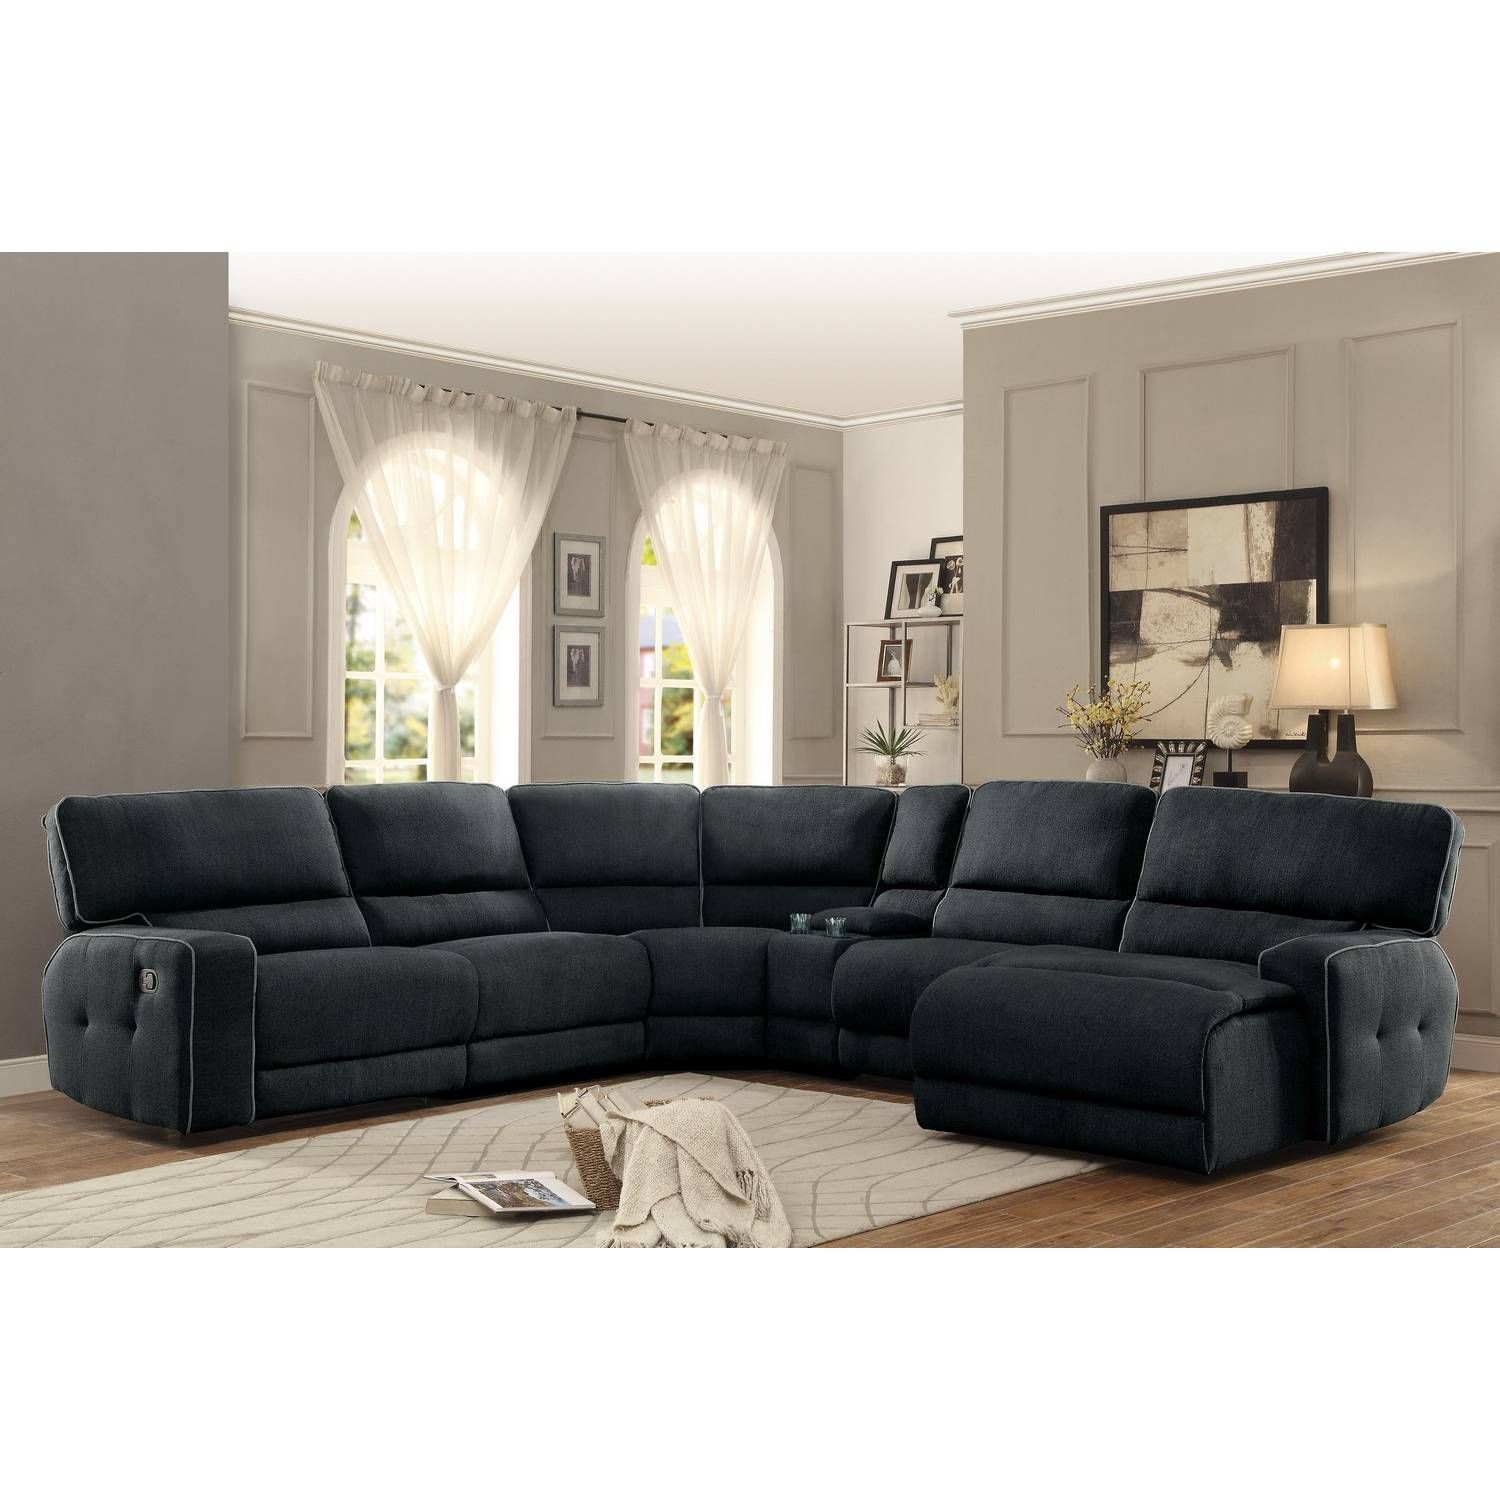 Keamey Reclining Sectional Sofa Set A – Polyester – Dark Grey Throughout Dark Grey Polyester Sofa Couches (View 15 of 15)